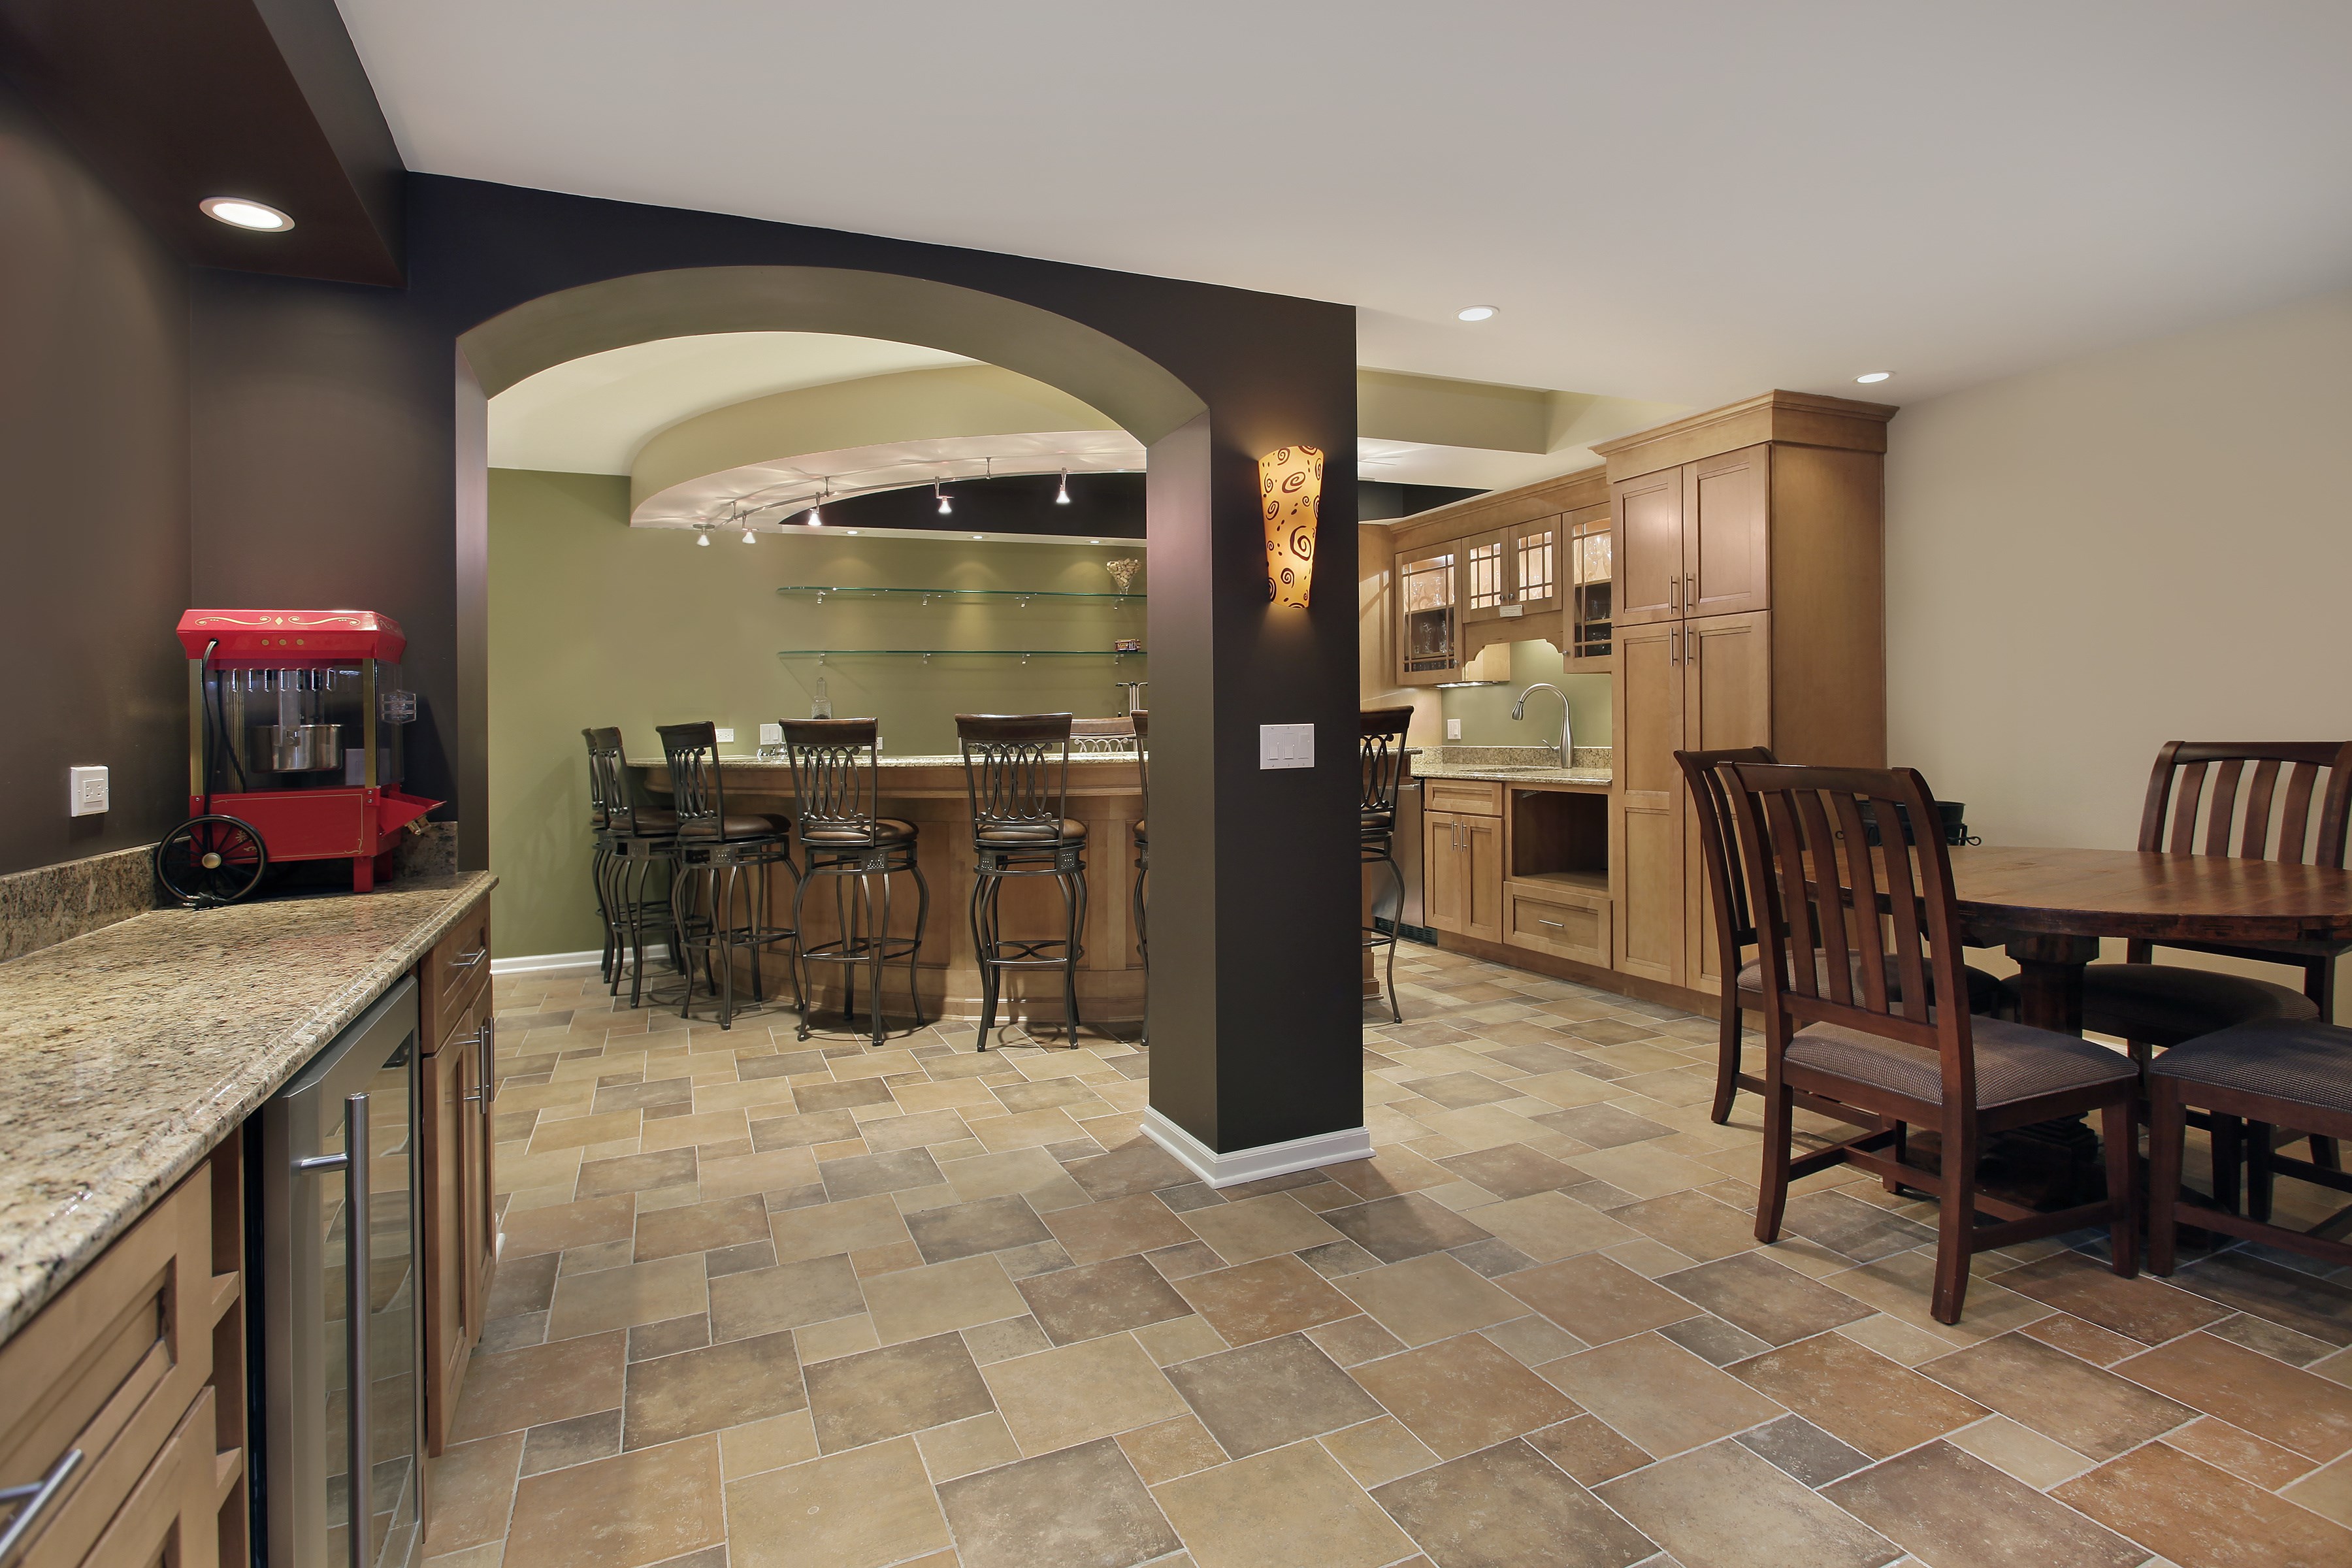 Lower level basement with bar